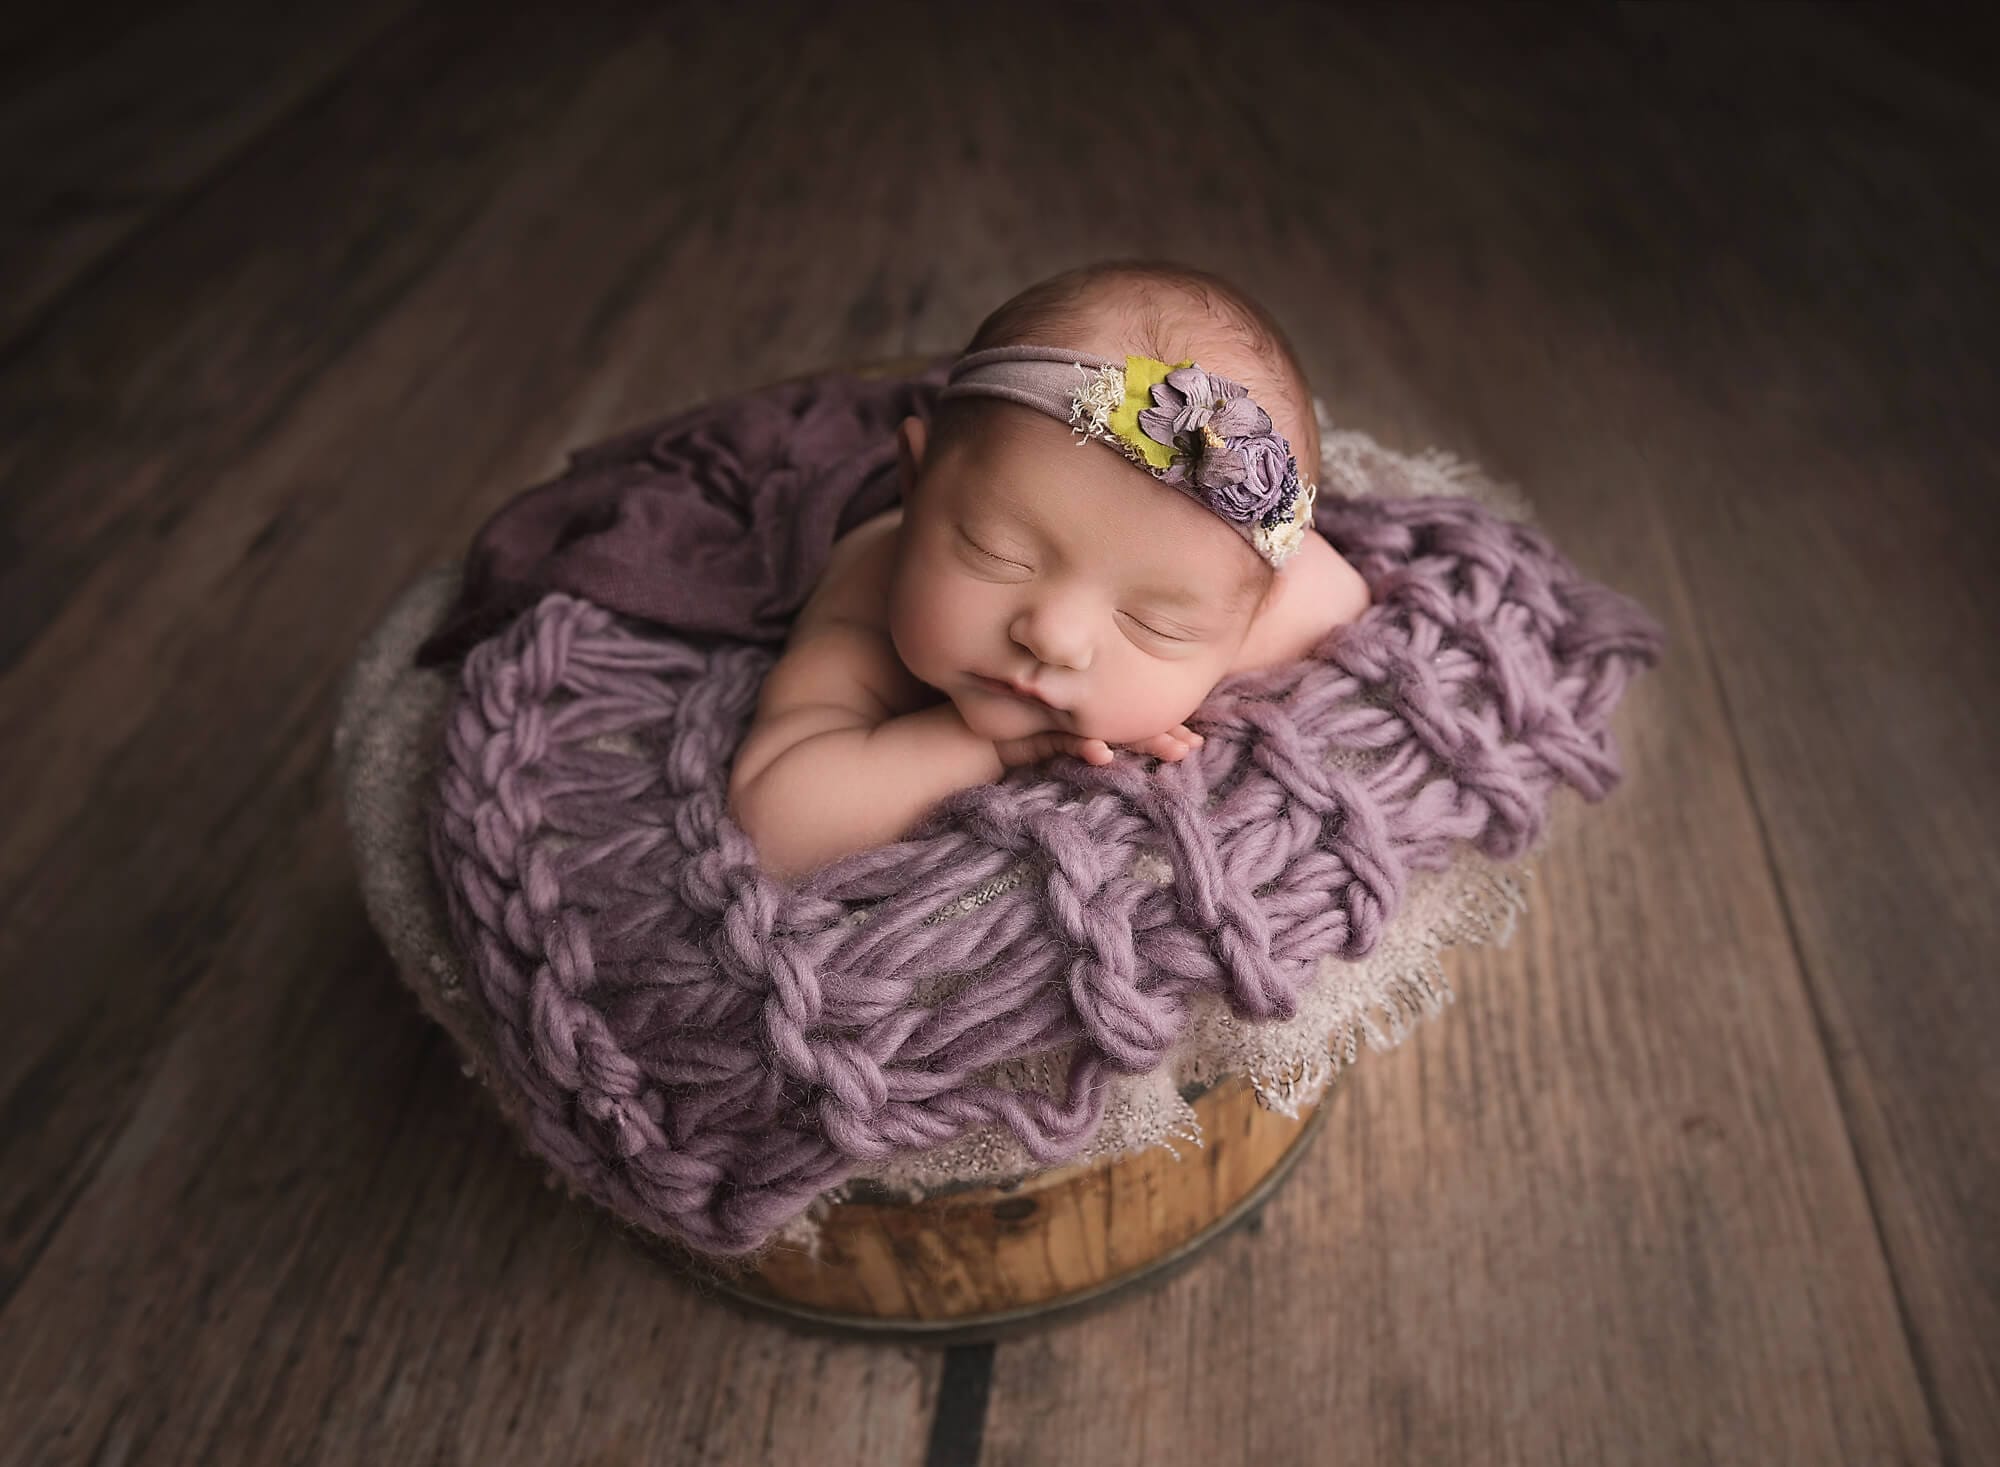 The baby girl is in the studio in a basket with purple accents and a headband with Lafayette OBGYN.